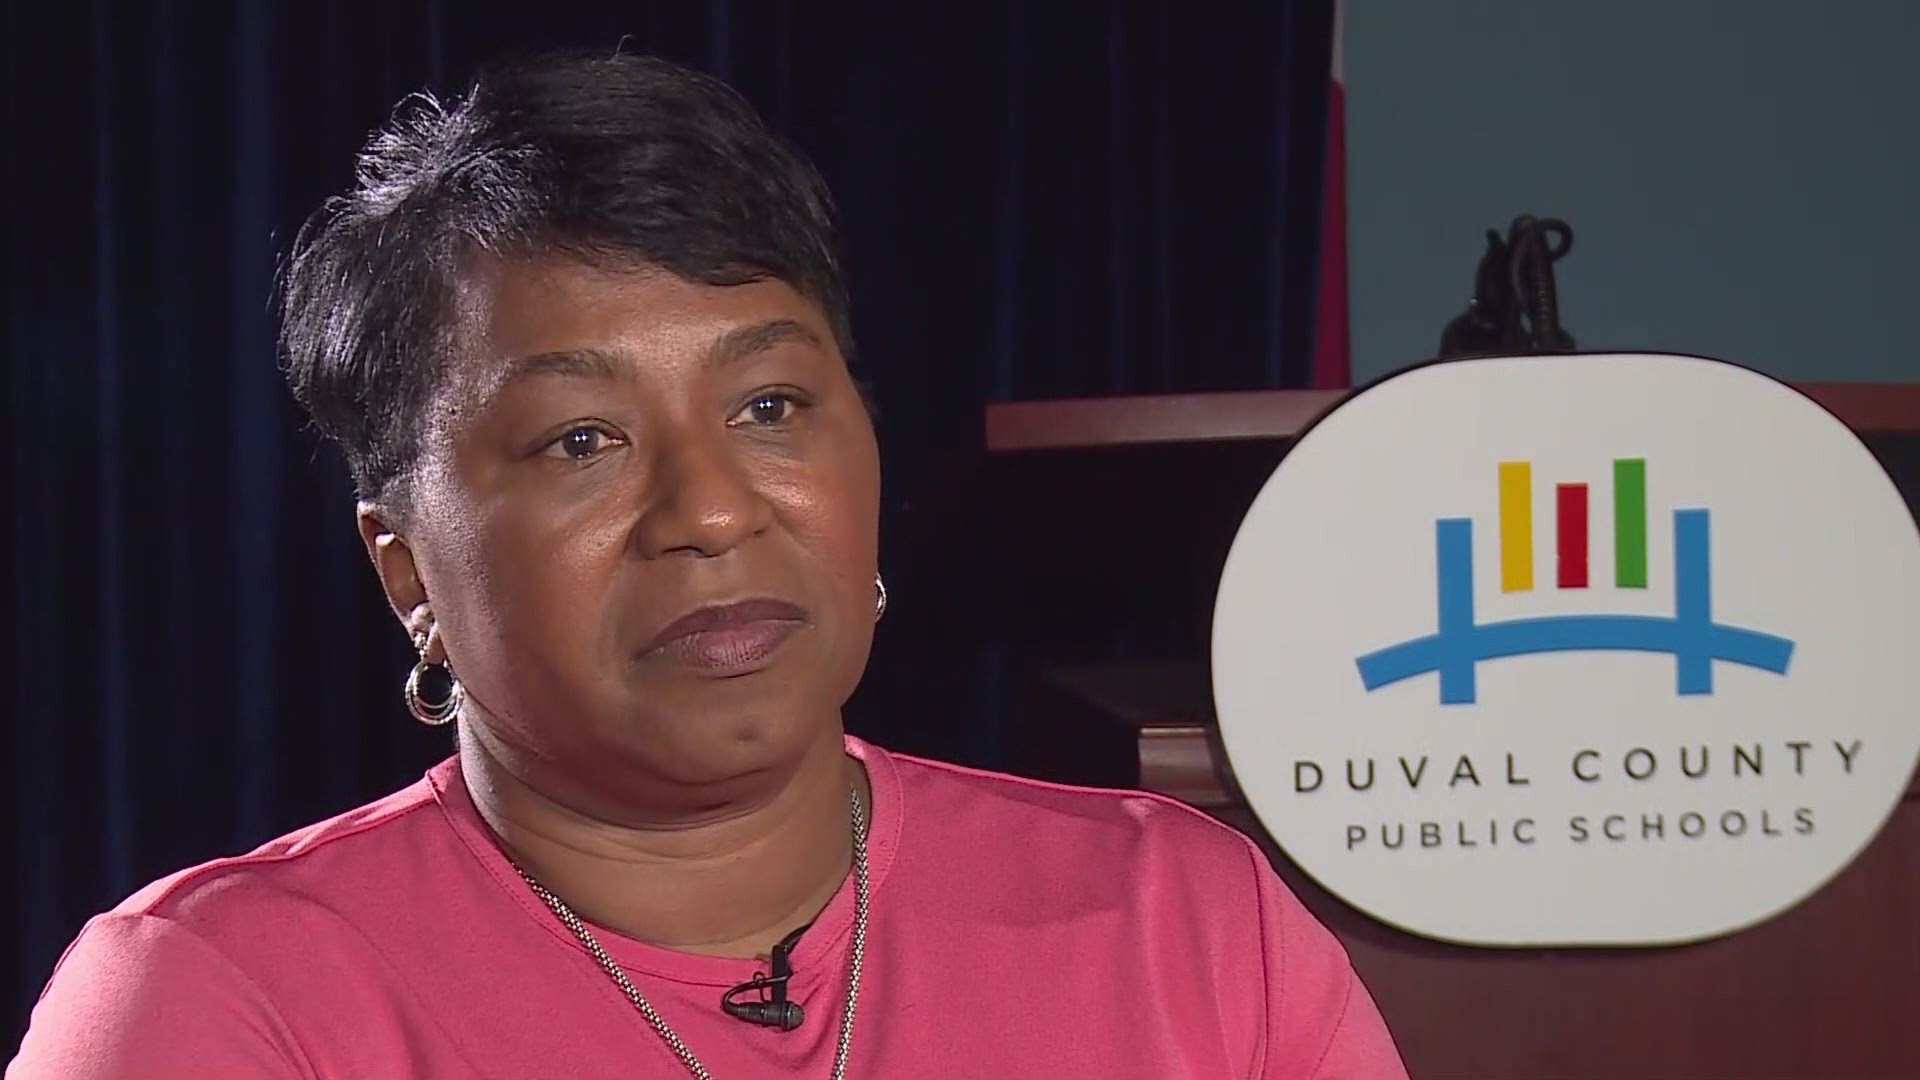 Dr. Diana Greene, superintendent of Duval County Schools, spoke Wednesday afternoon about the shooting which took place near a bus stop earlier that morning.